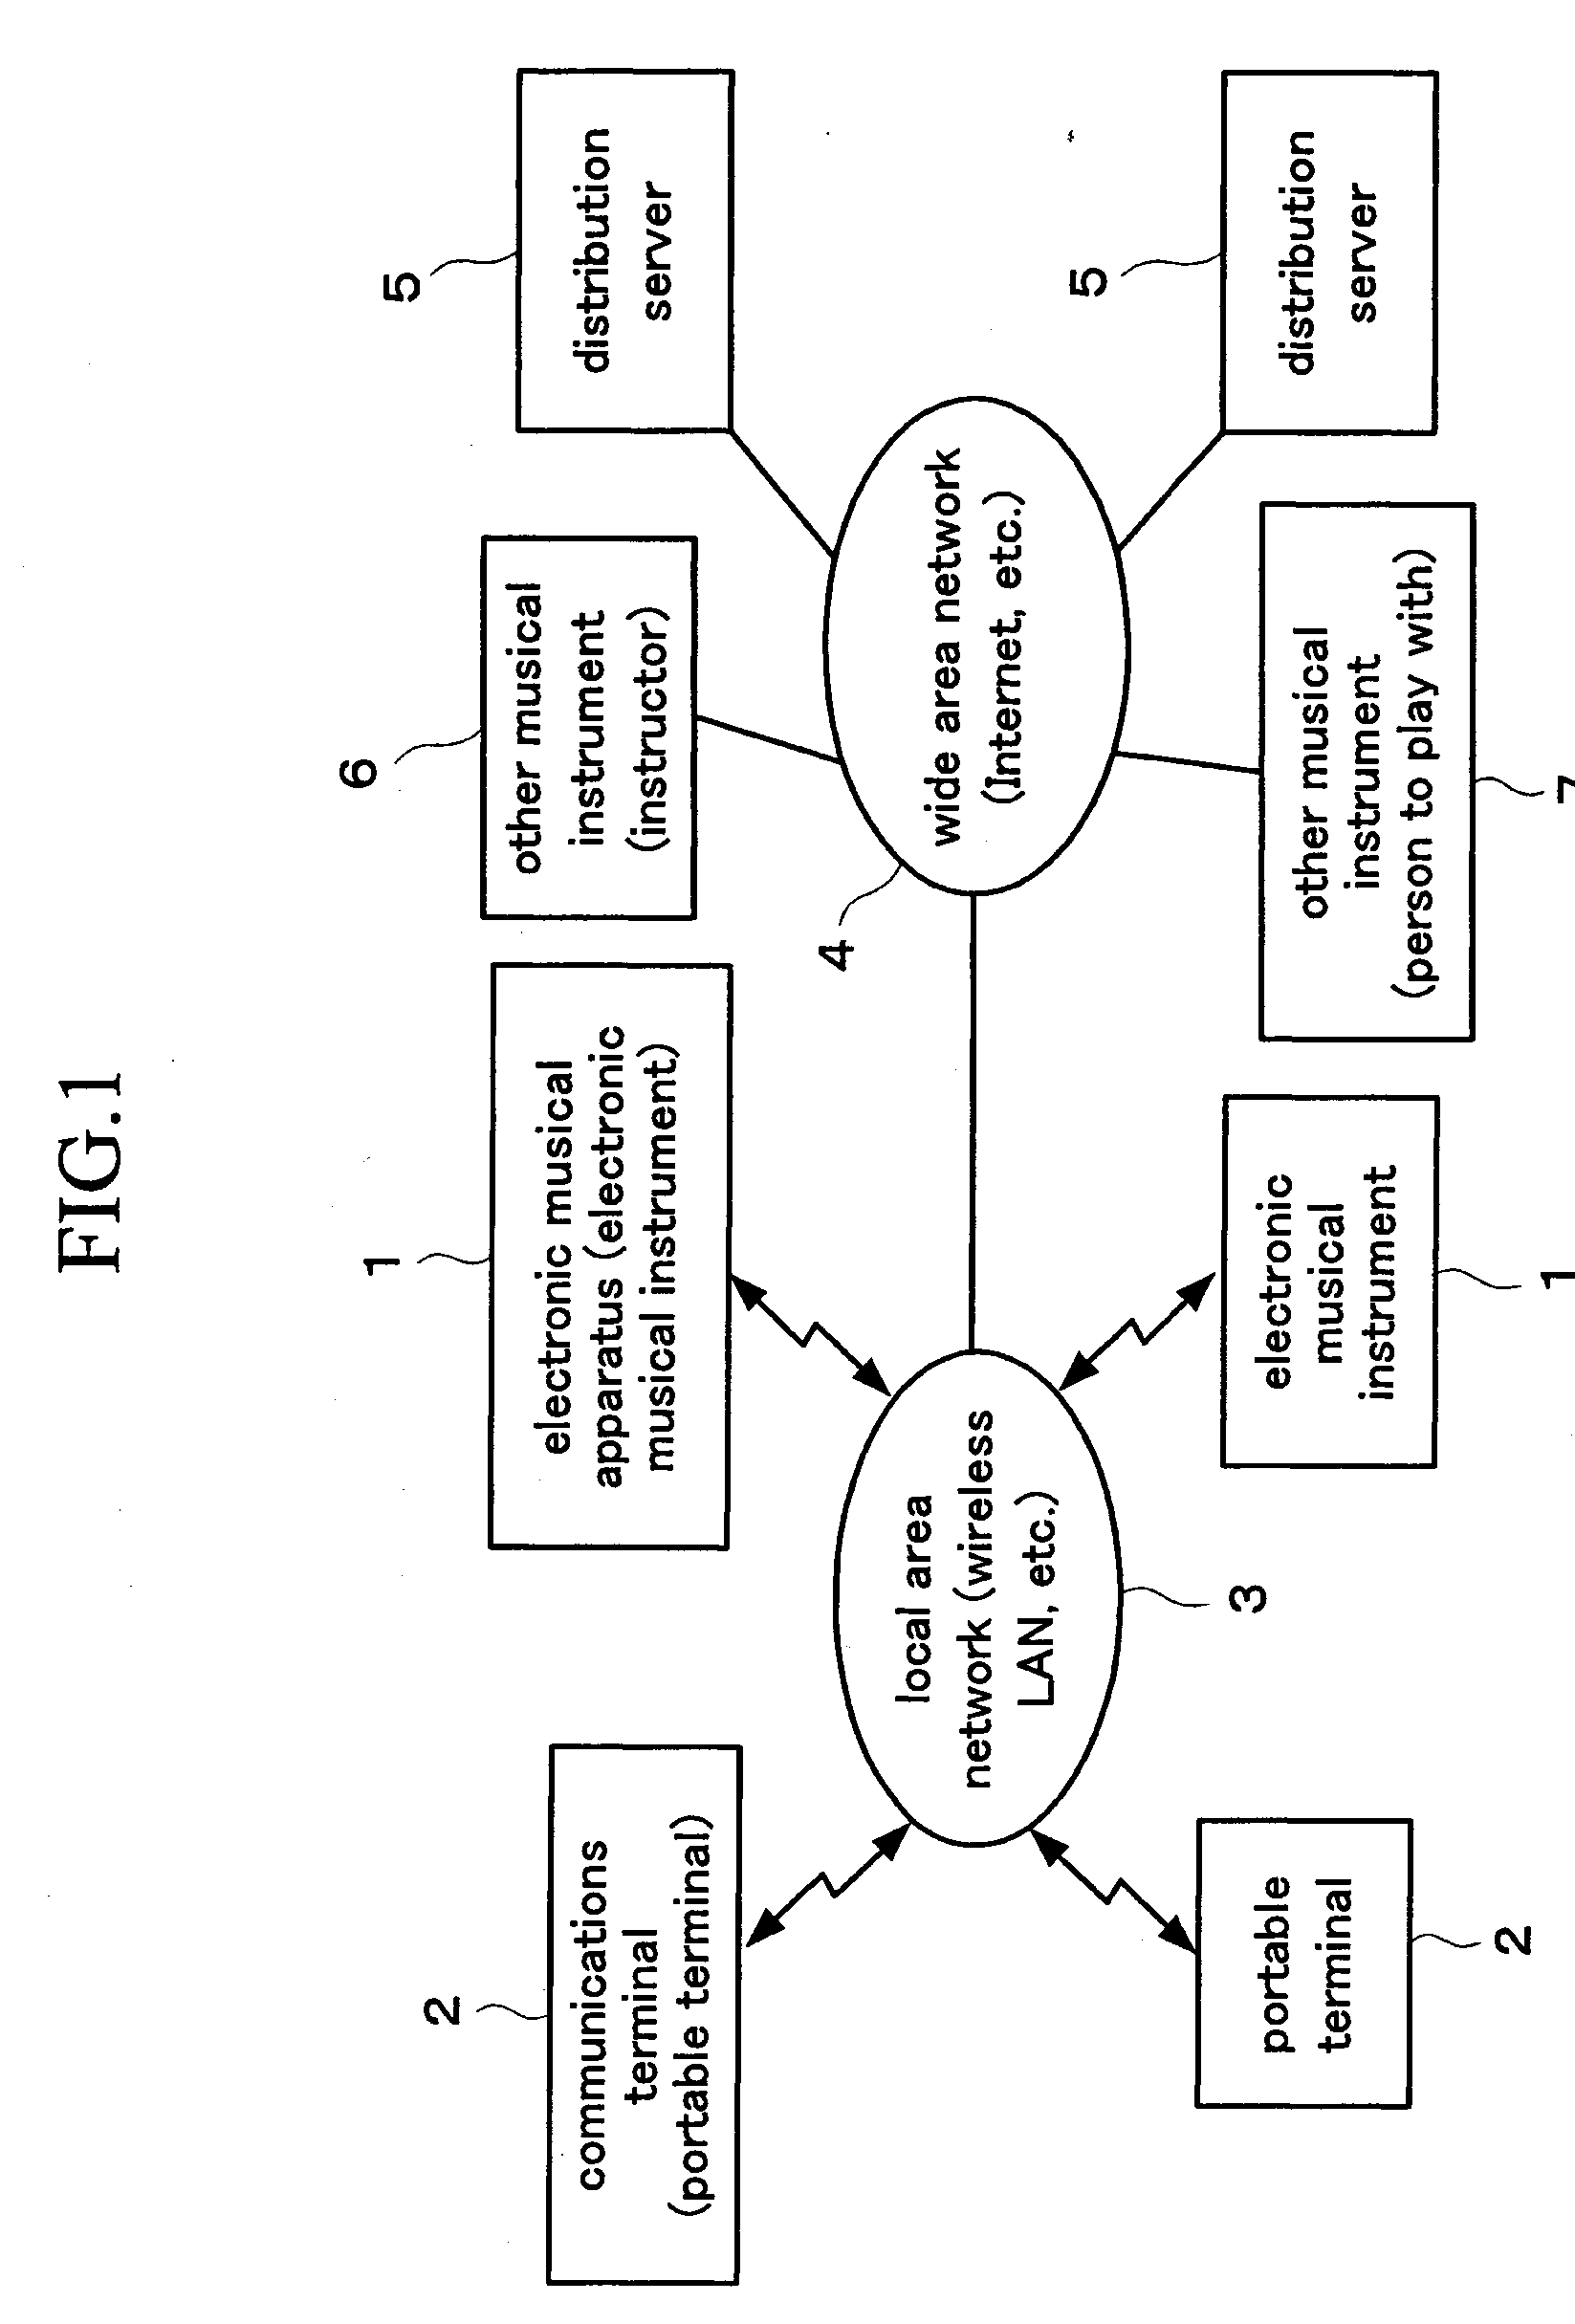 Service provision system for electronic musical apparatus